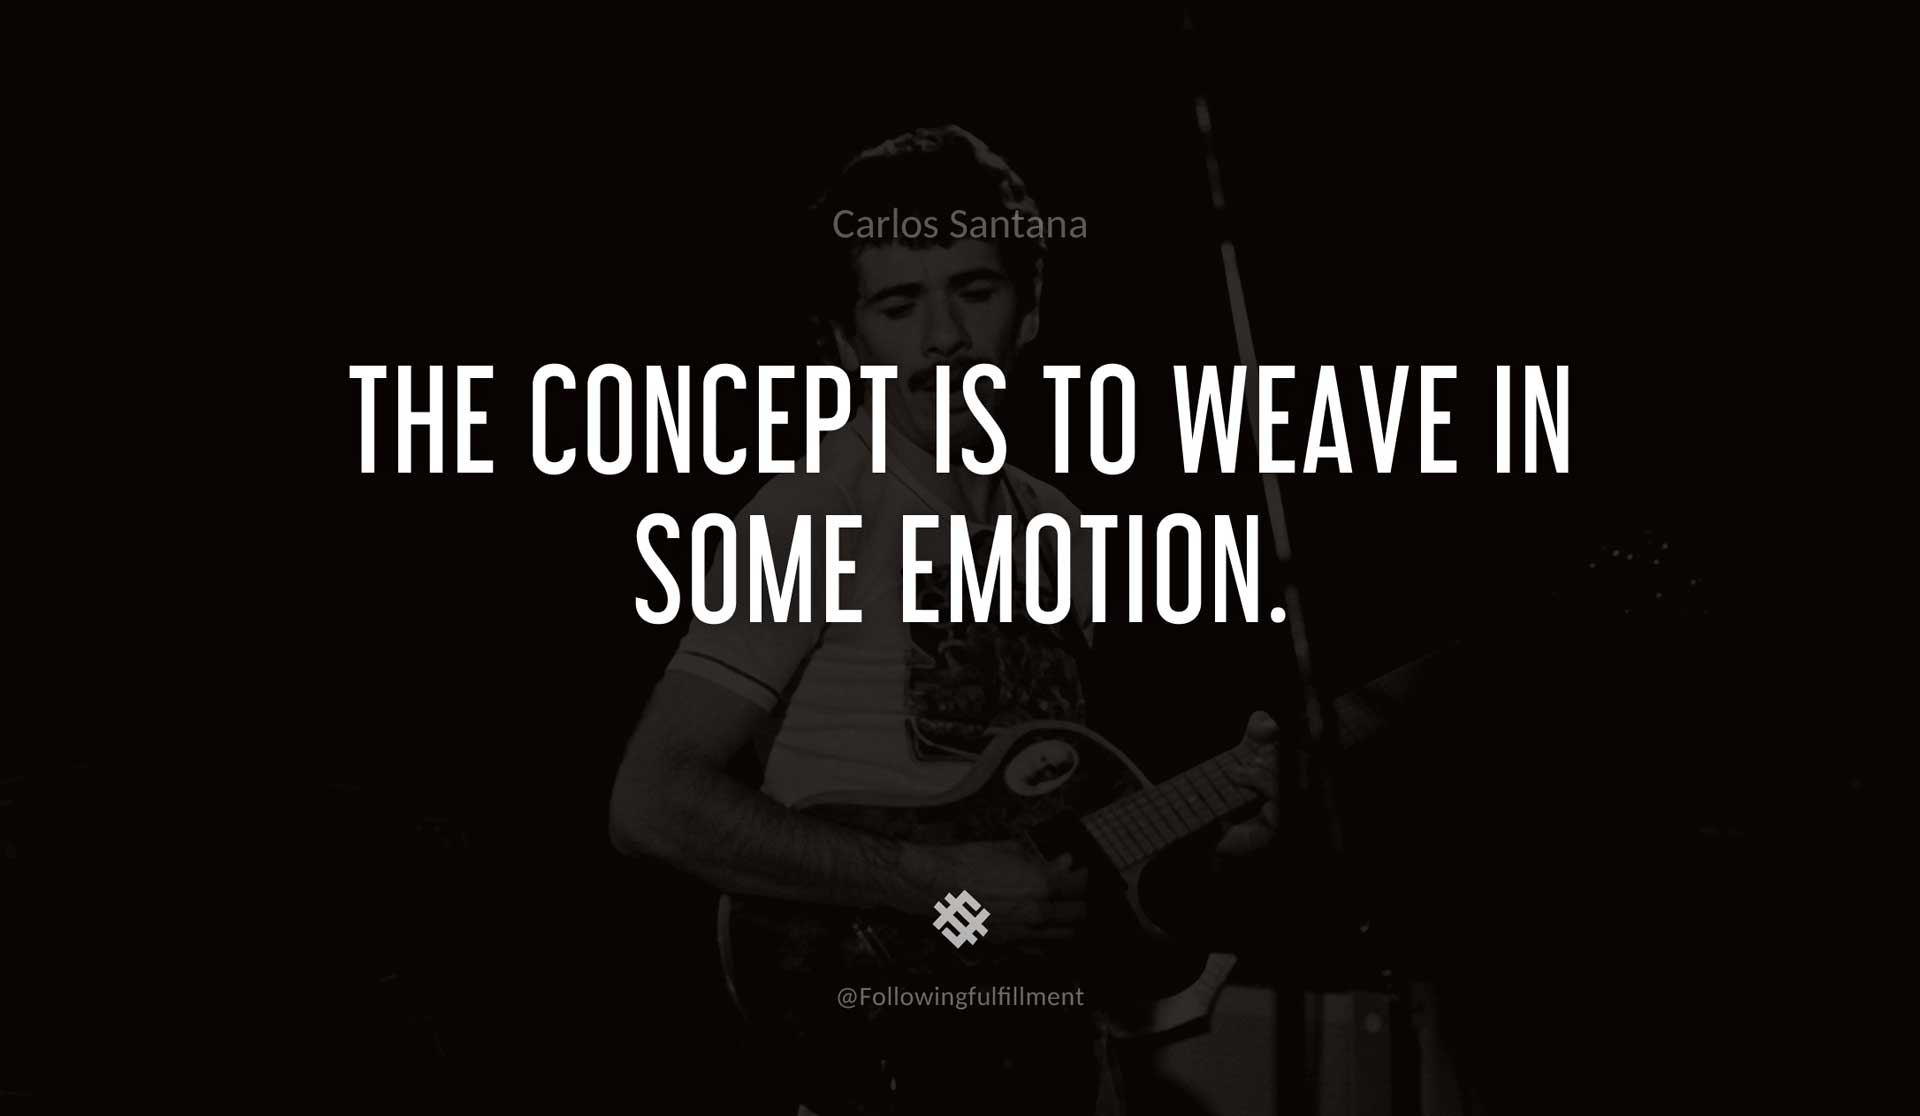 The-concept-is-to-weave-in-some-emotion.-CARLOS-SANTANA-Quote.jpg